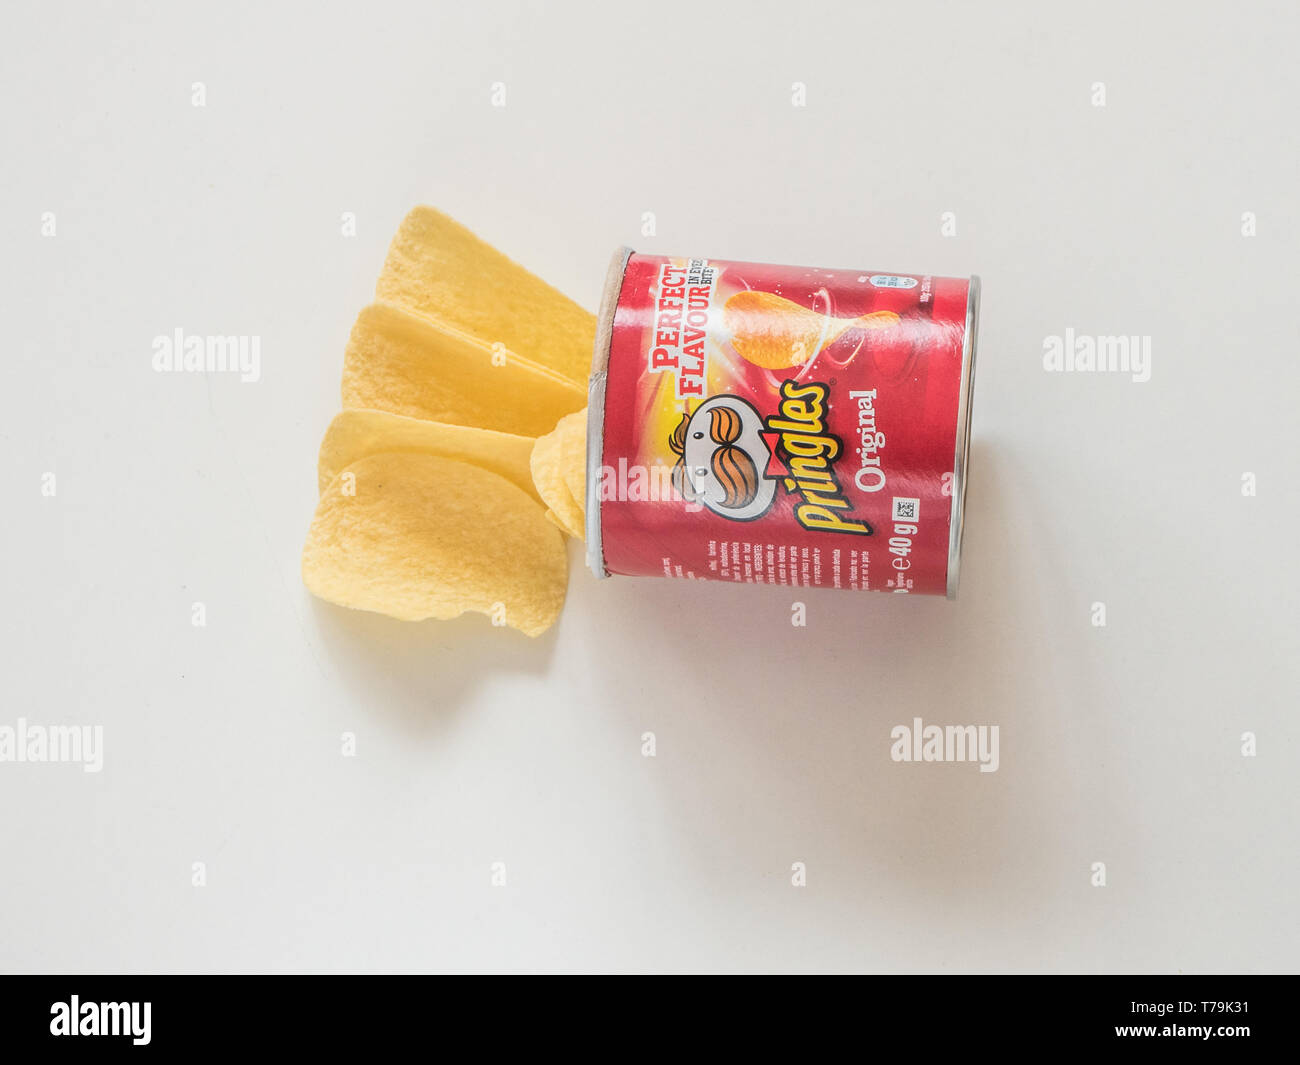 How Pringles Are Made (from Unwrapped), Unwrapped